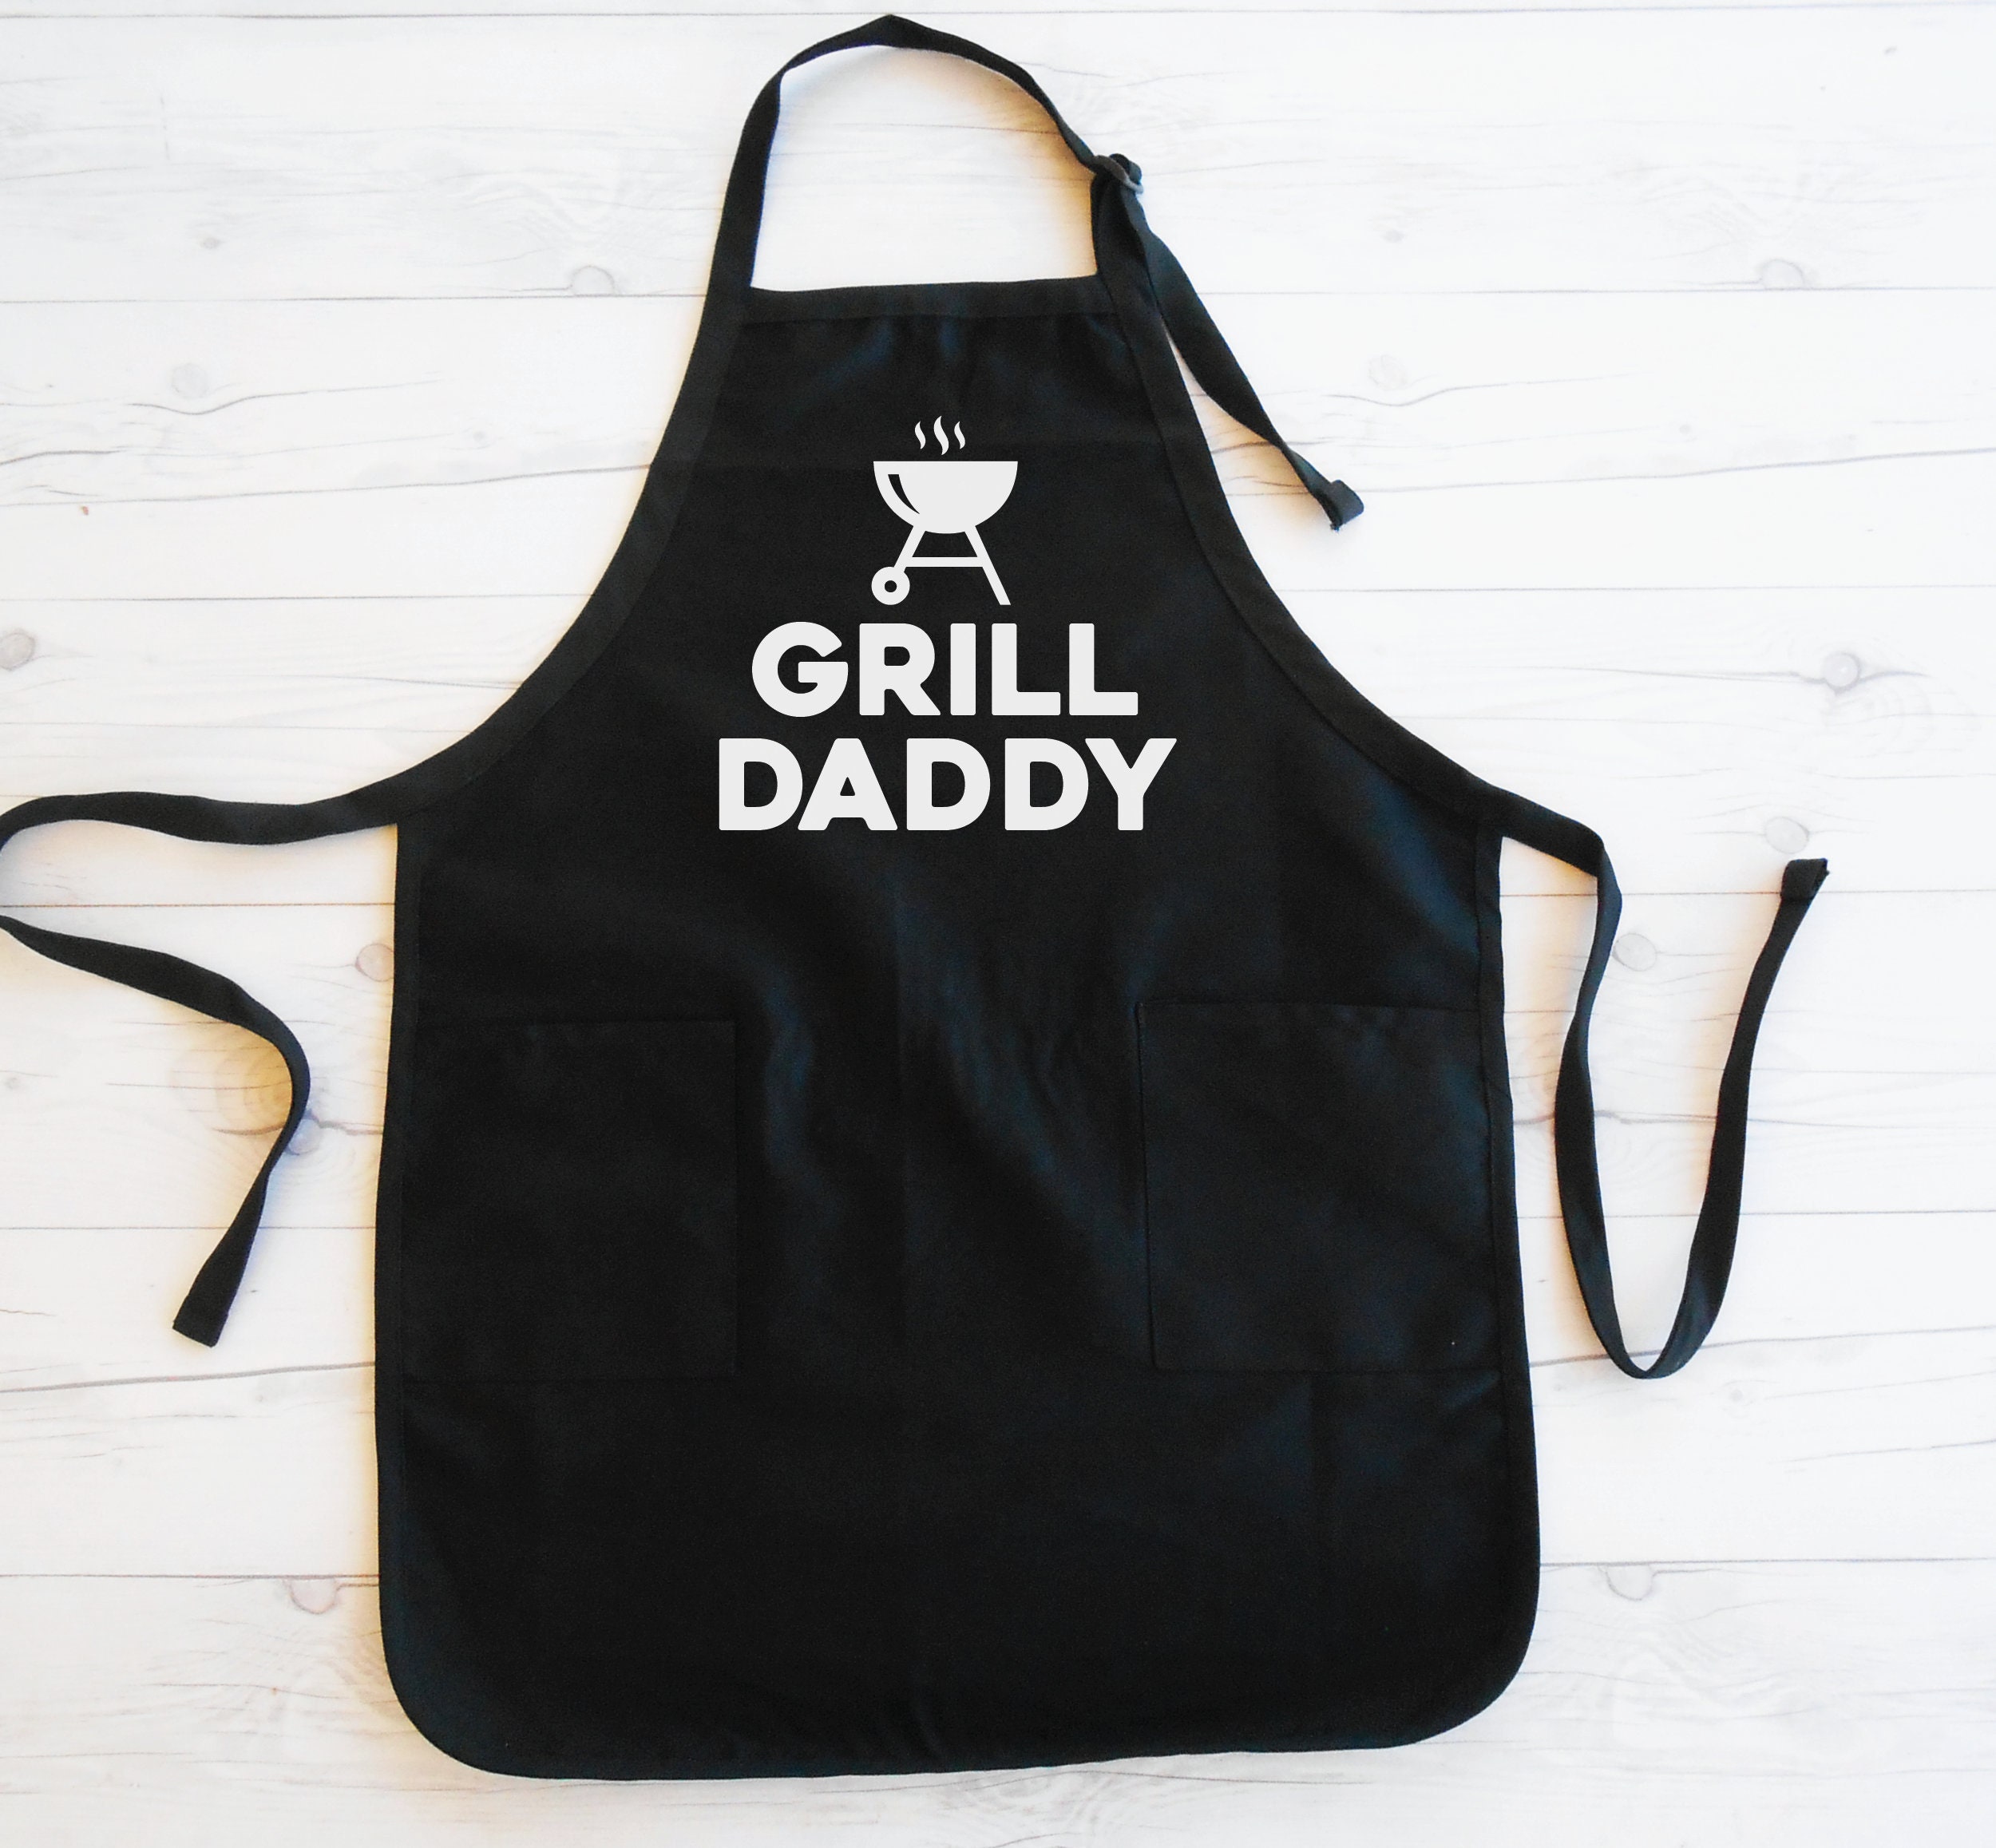 Grill Daddy Apron Dad Birthday Husband Birthday Gift picture pic